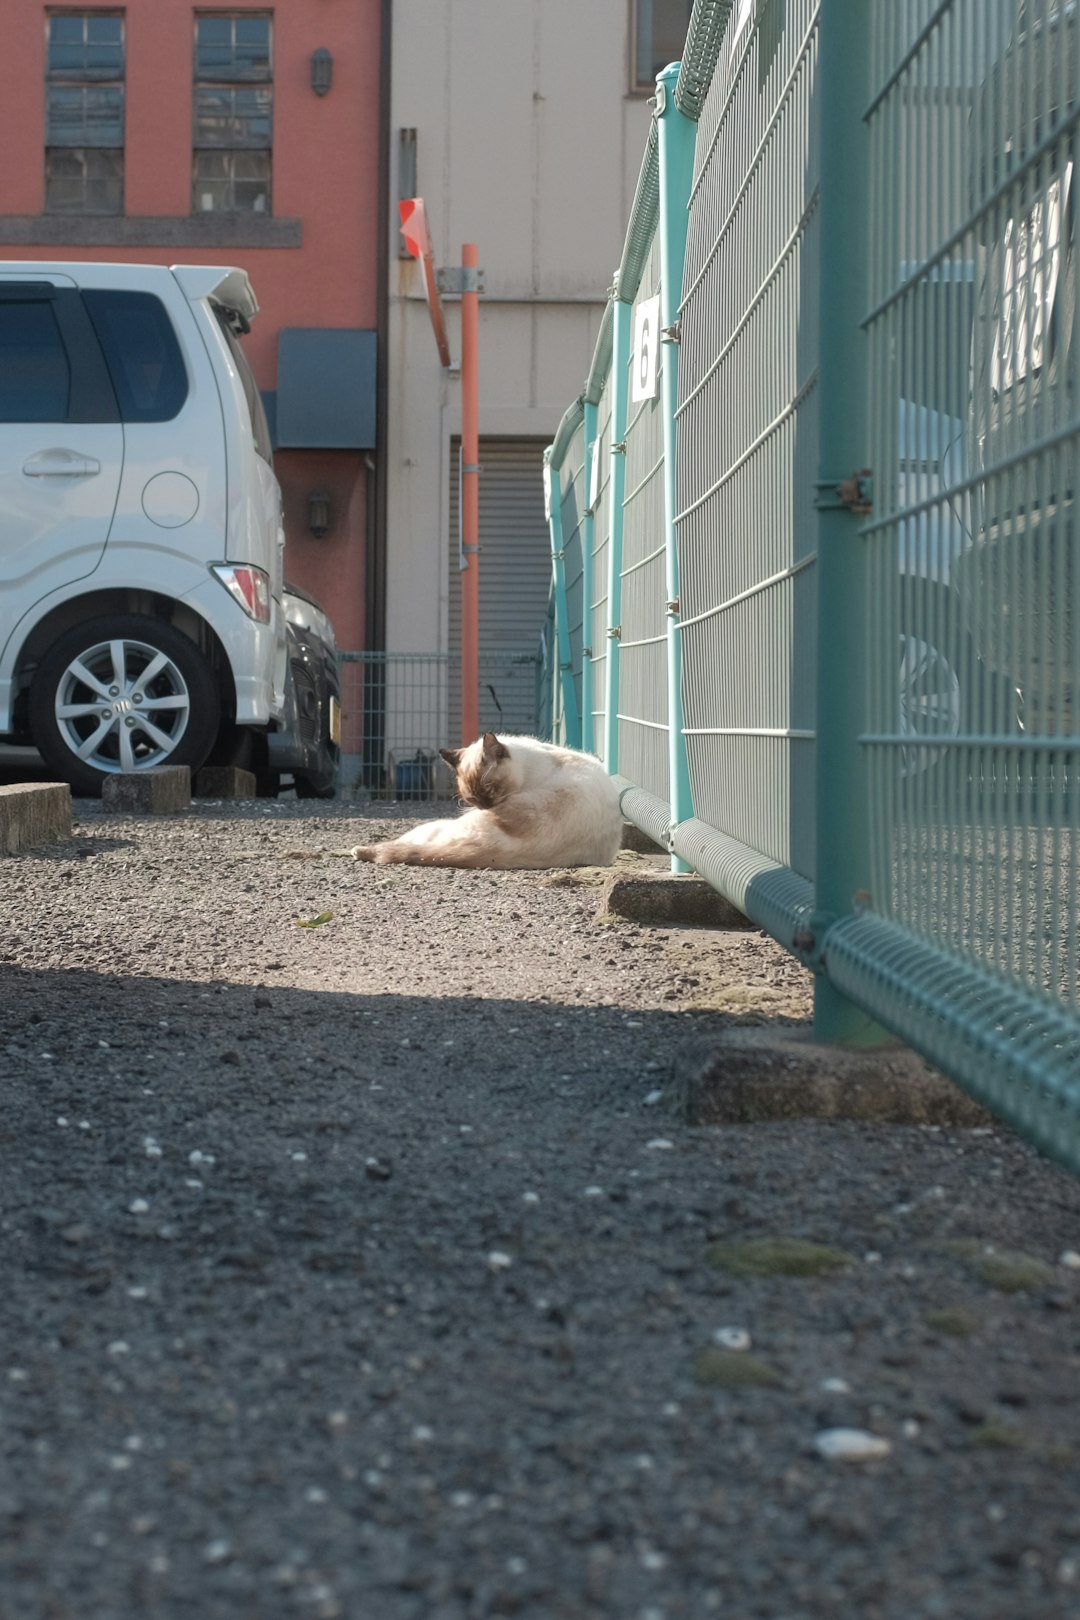 white and brown short coated dog lying on ground beside white car during daytime